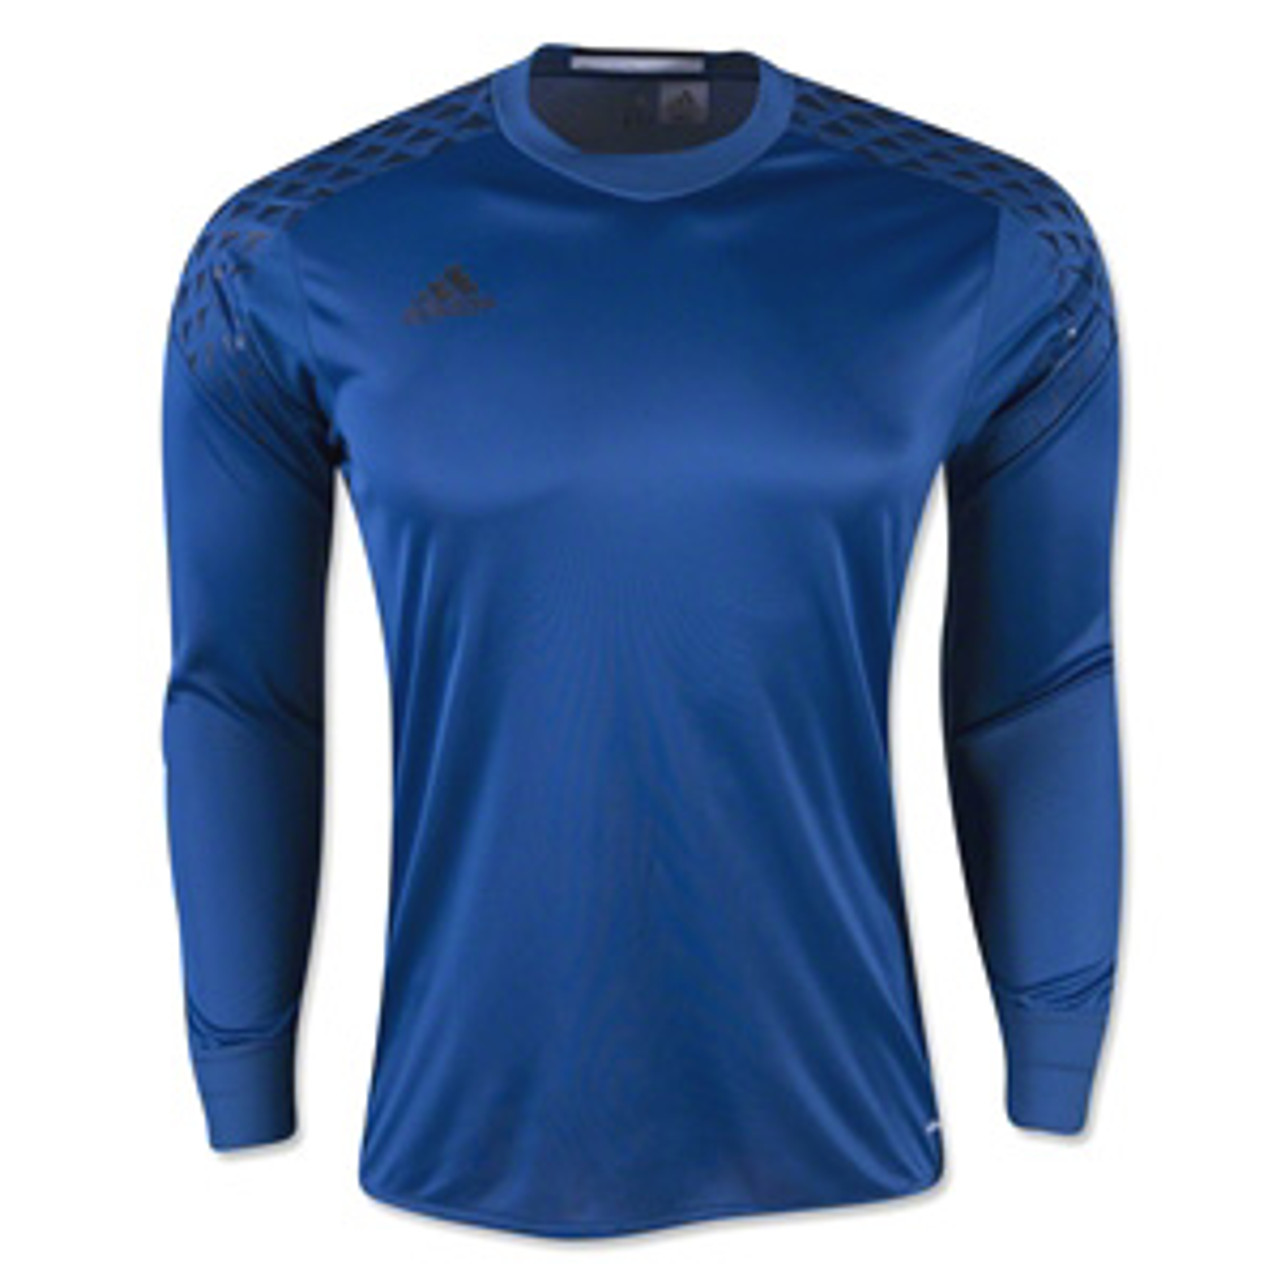 ADIDAS ONORE JERSEY ROYAL BLUE Plus